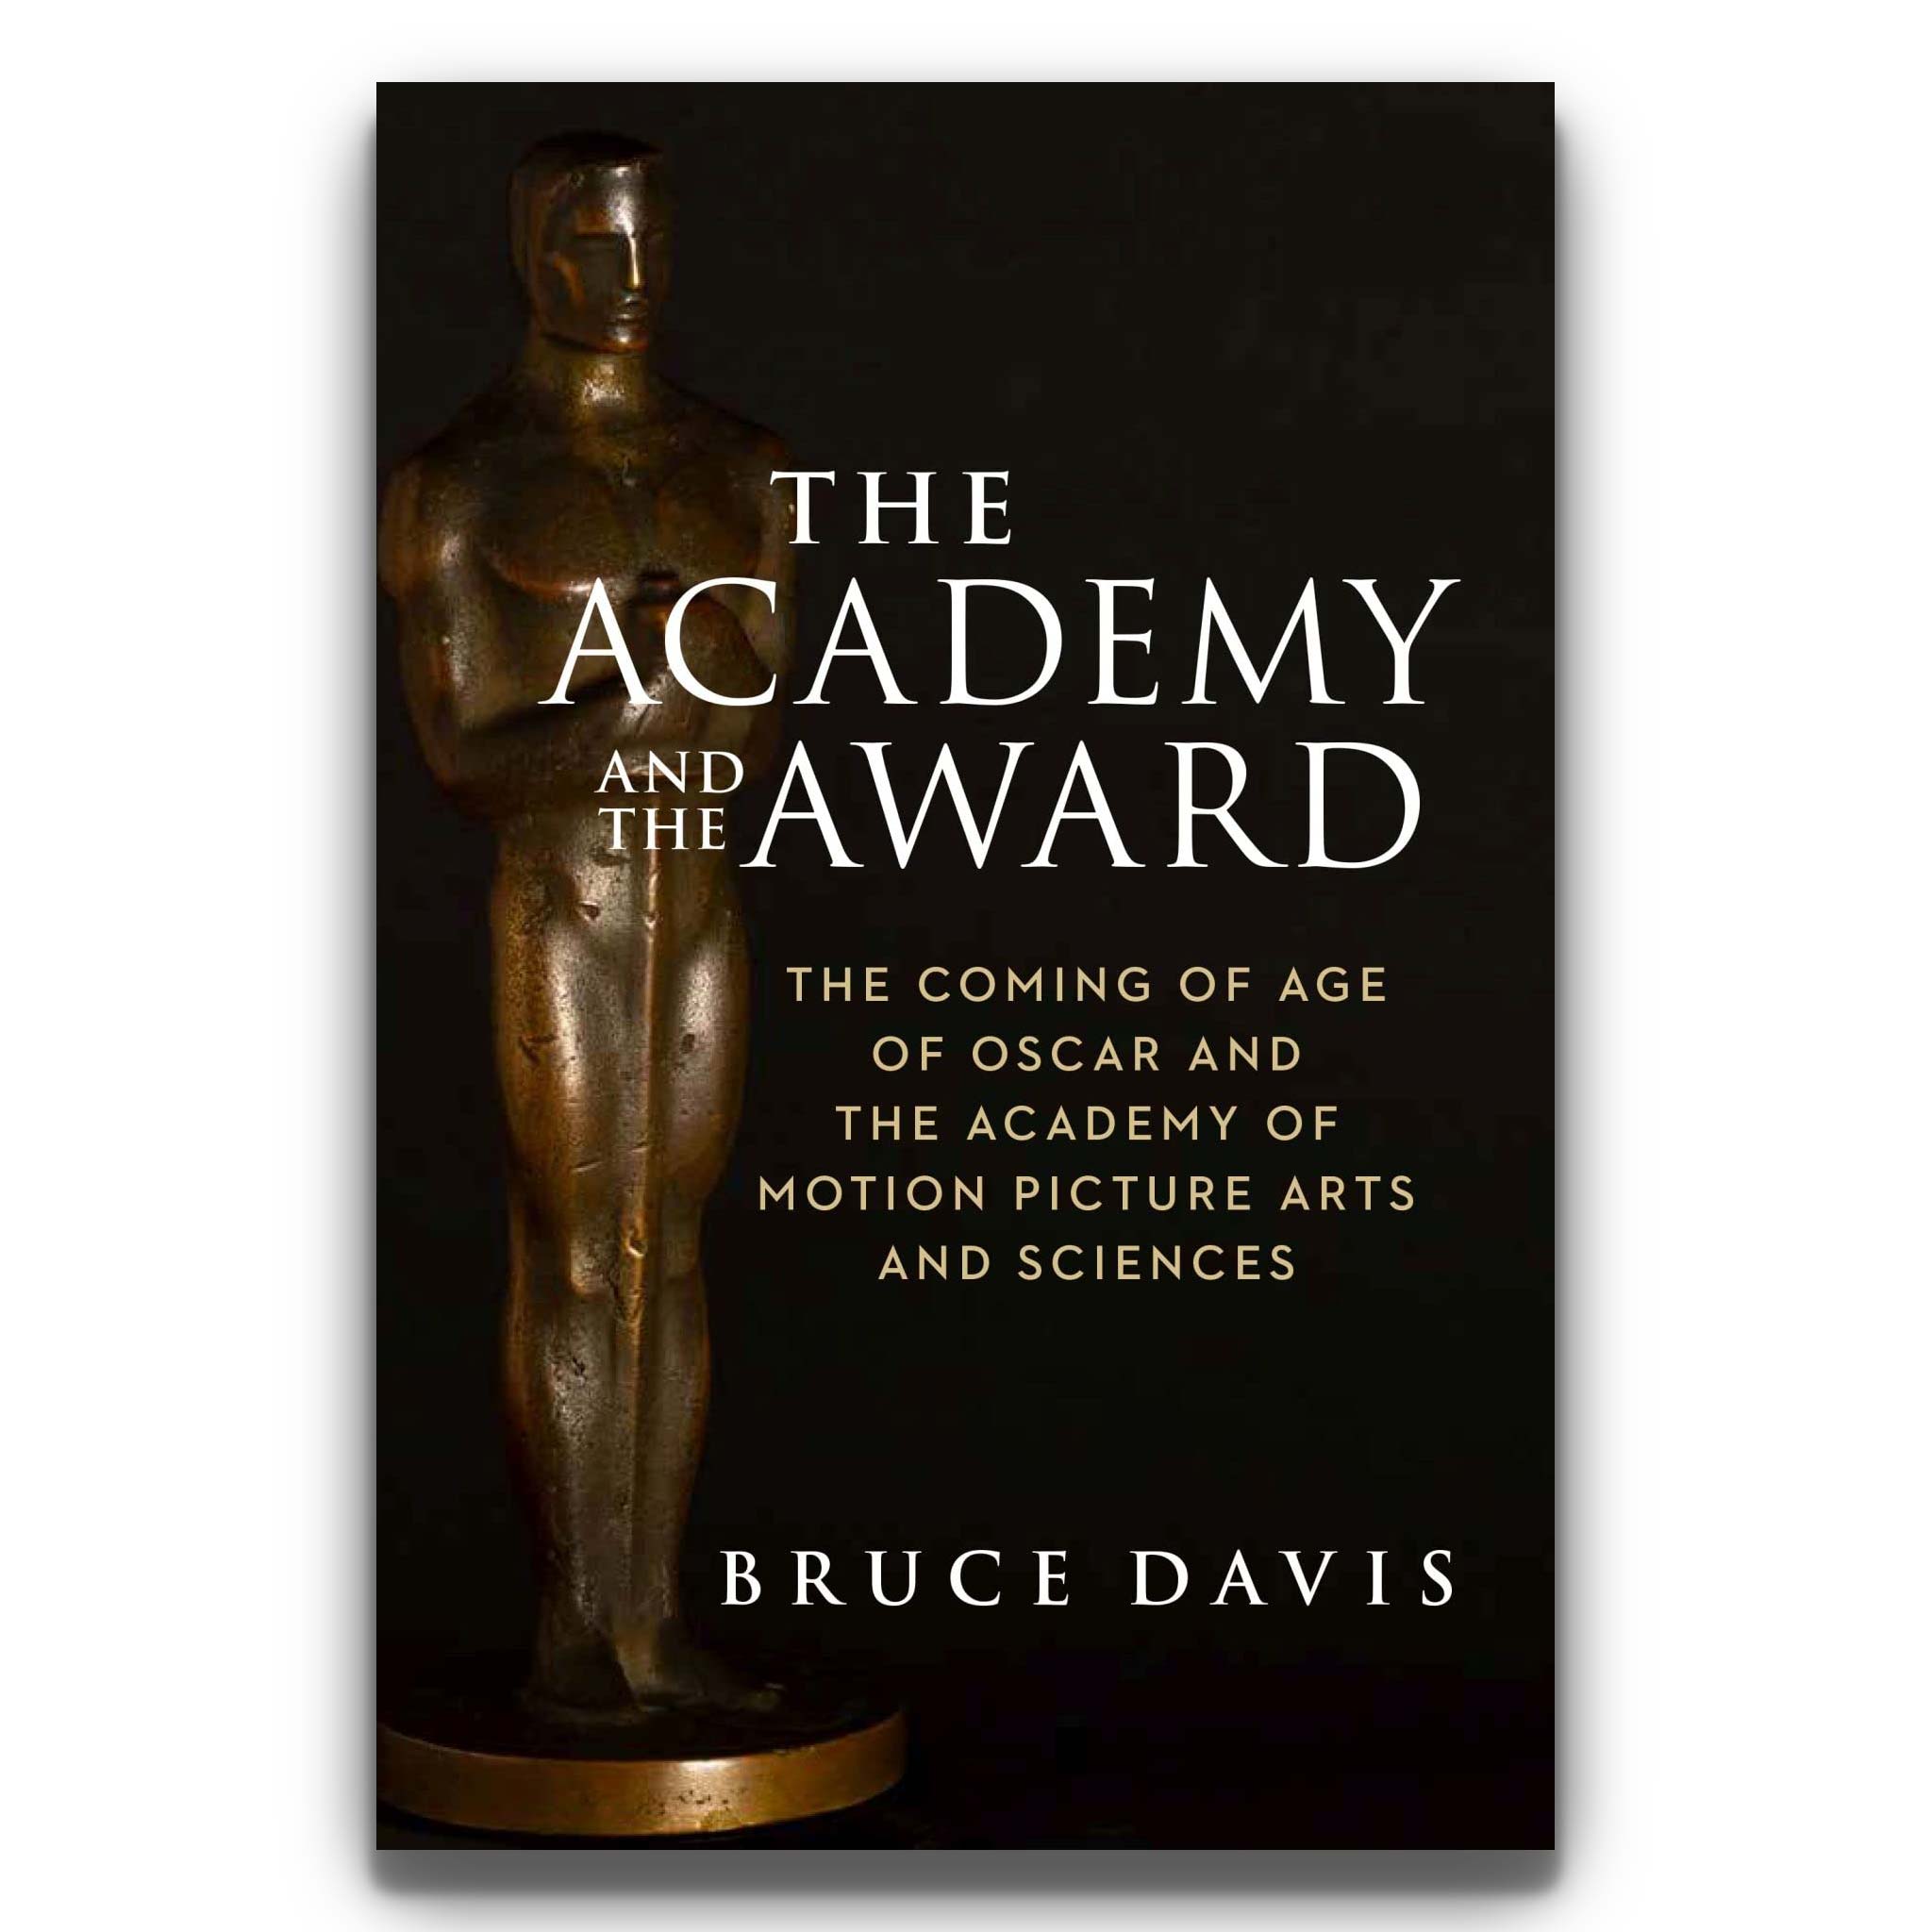 THE ACADEMY AND THE AWARD: THE COMING OF AGE OF OSCAR